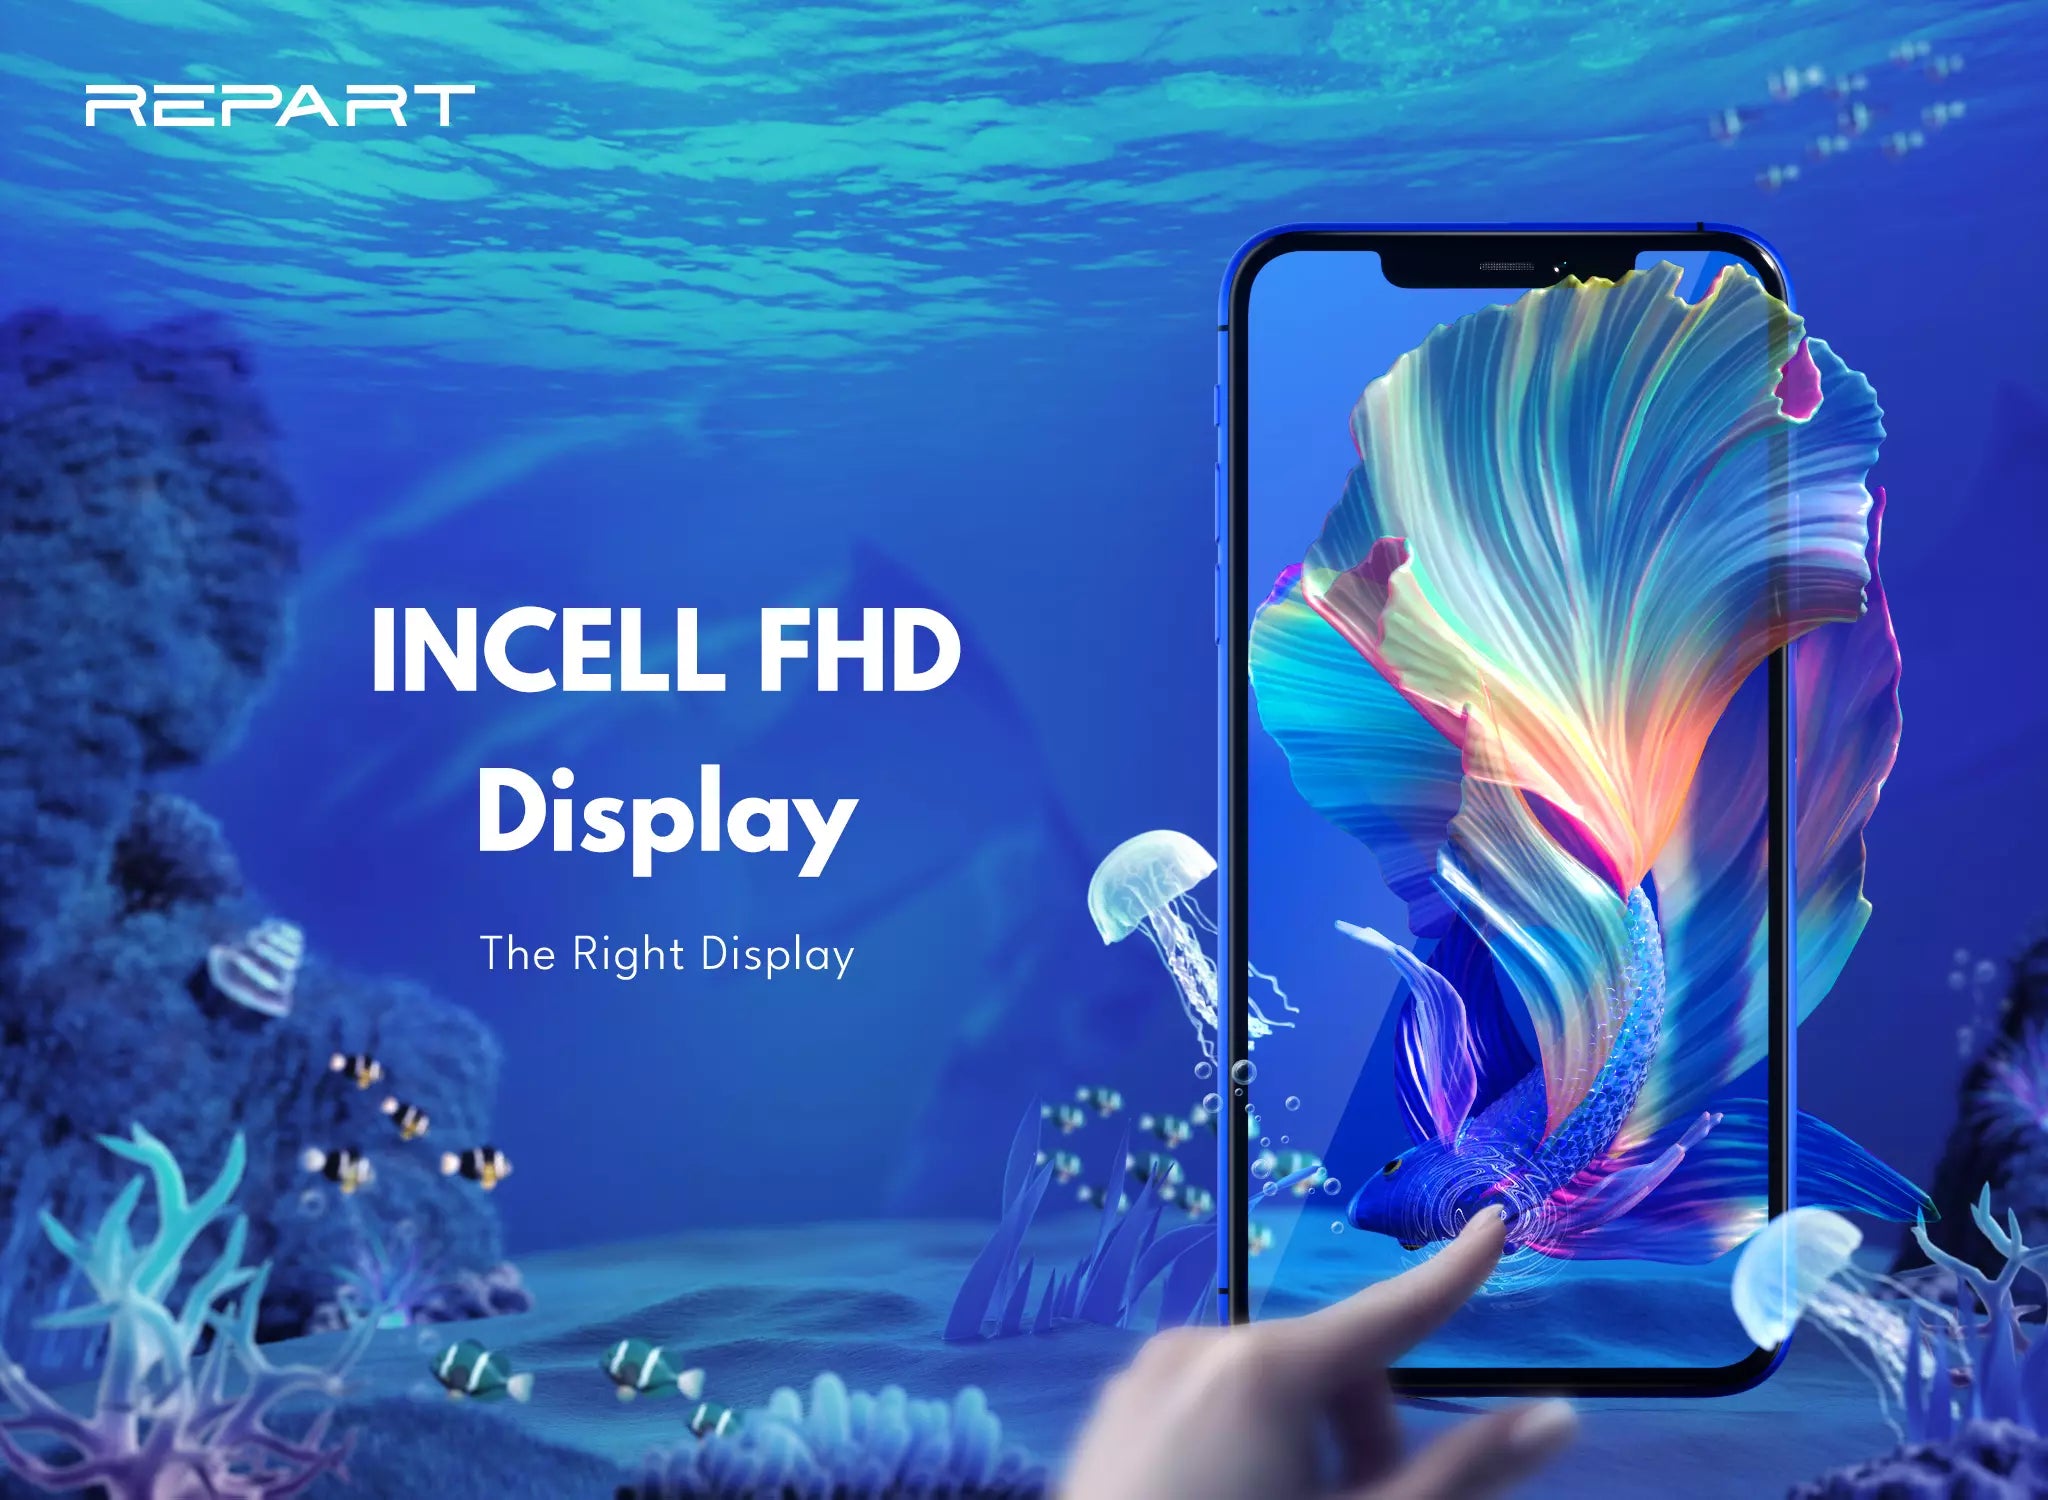 incell fhd display, the right display